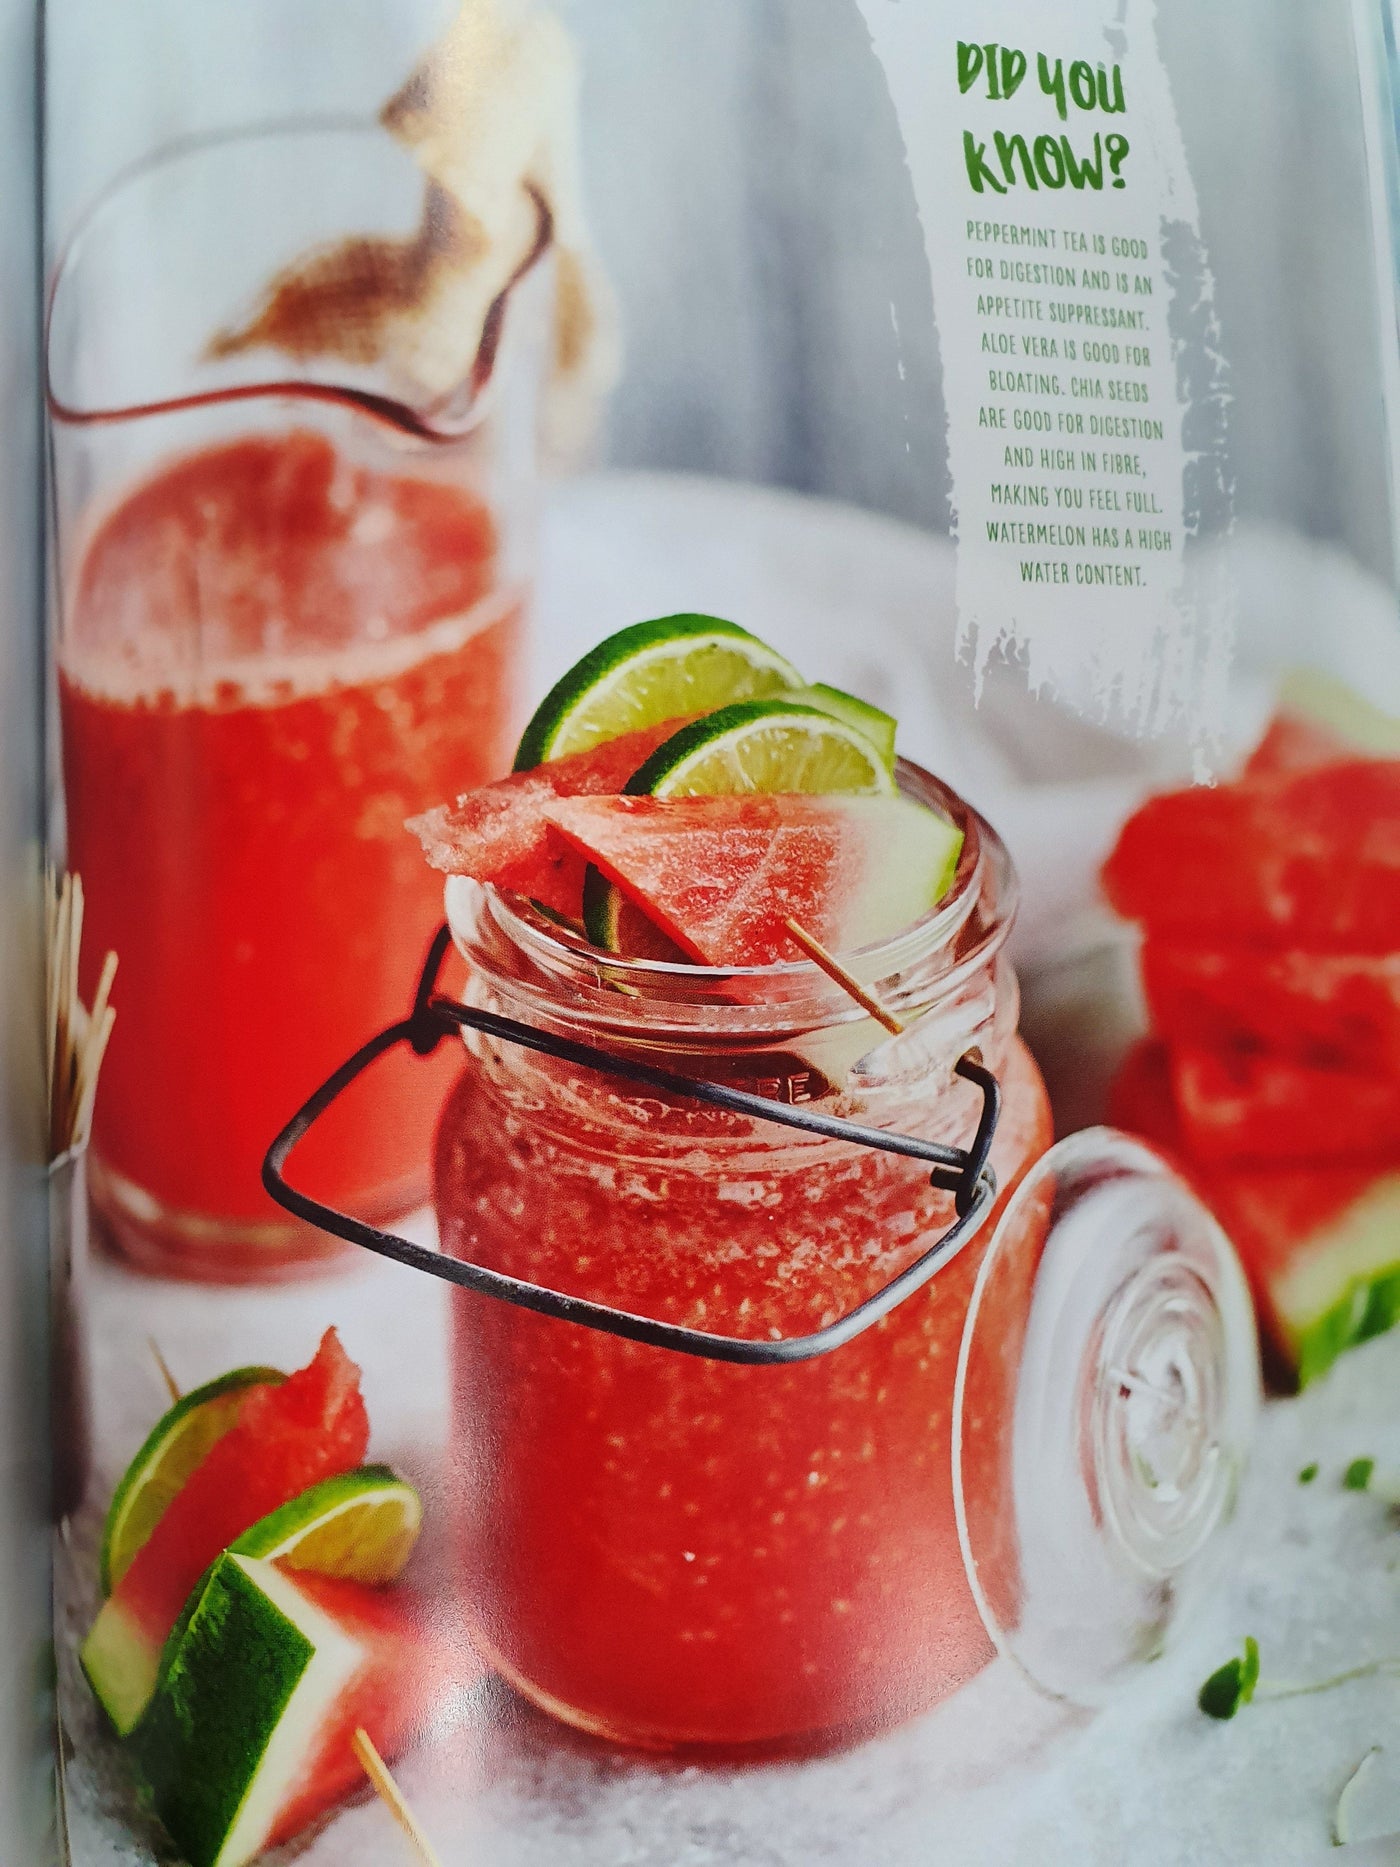 THE AUSTRALIAN WOMEN'S WEEKLY HOMEWARES Juices and Smoothies Recipie Book